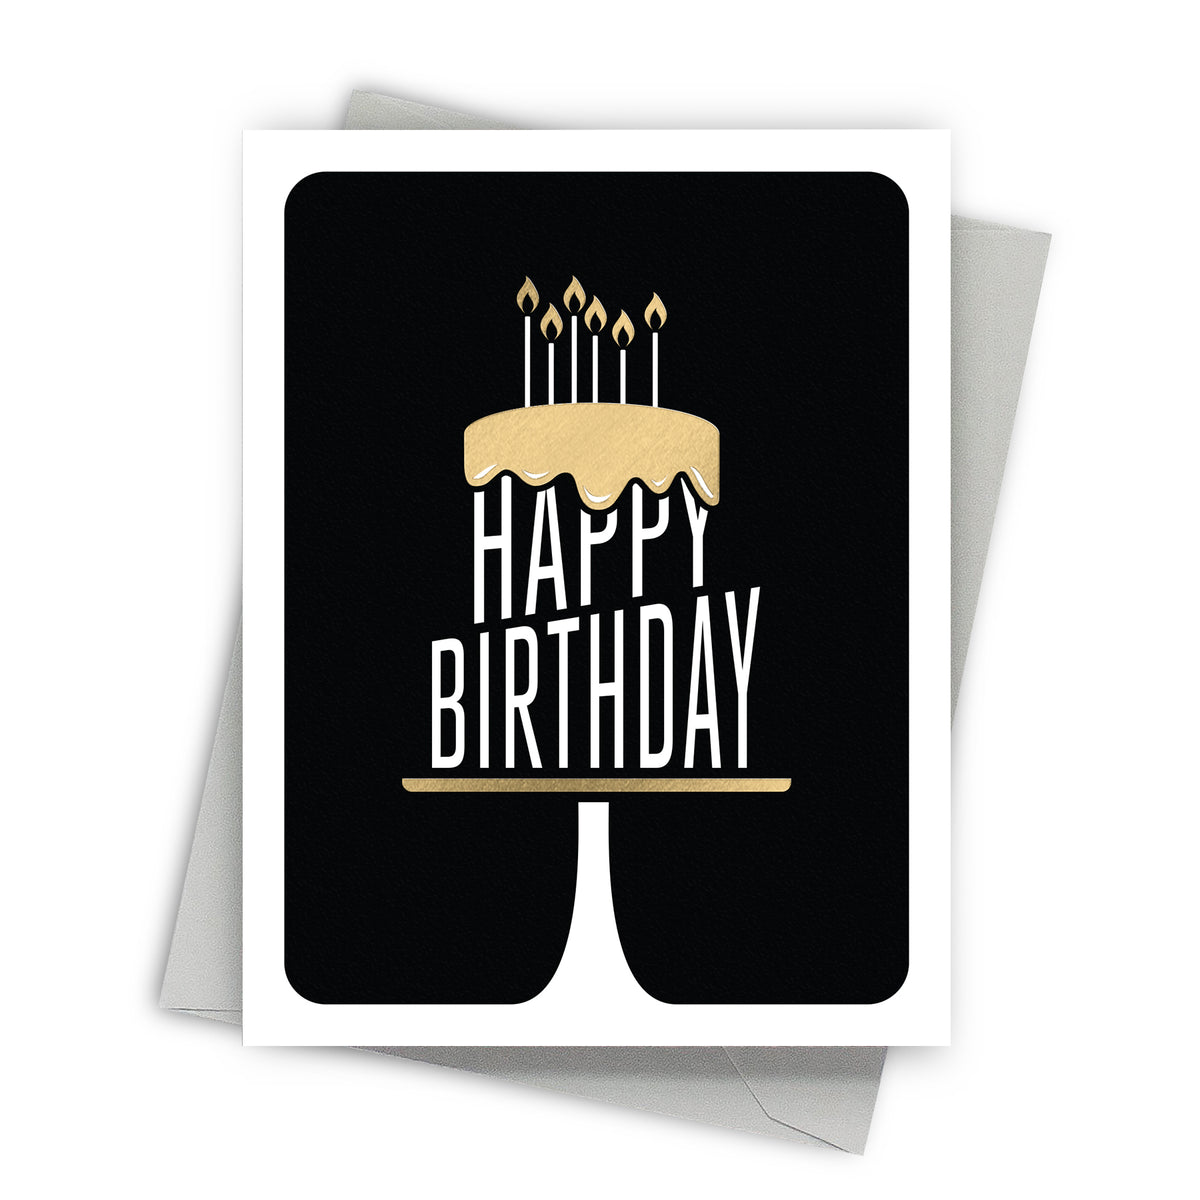 Cake Display Birthday Card by Fine Moments